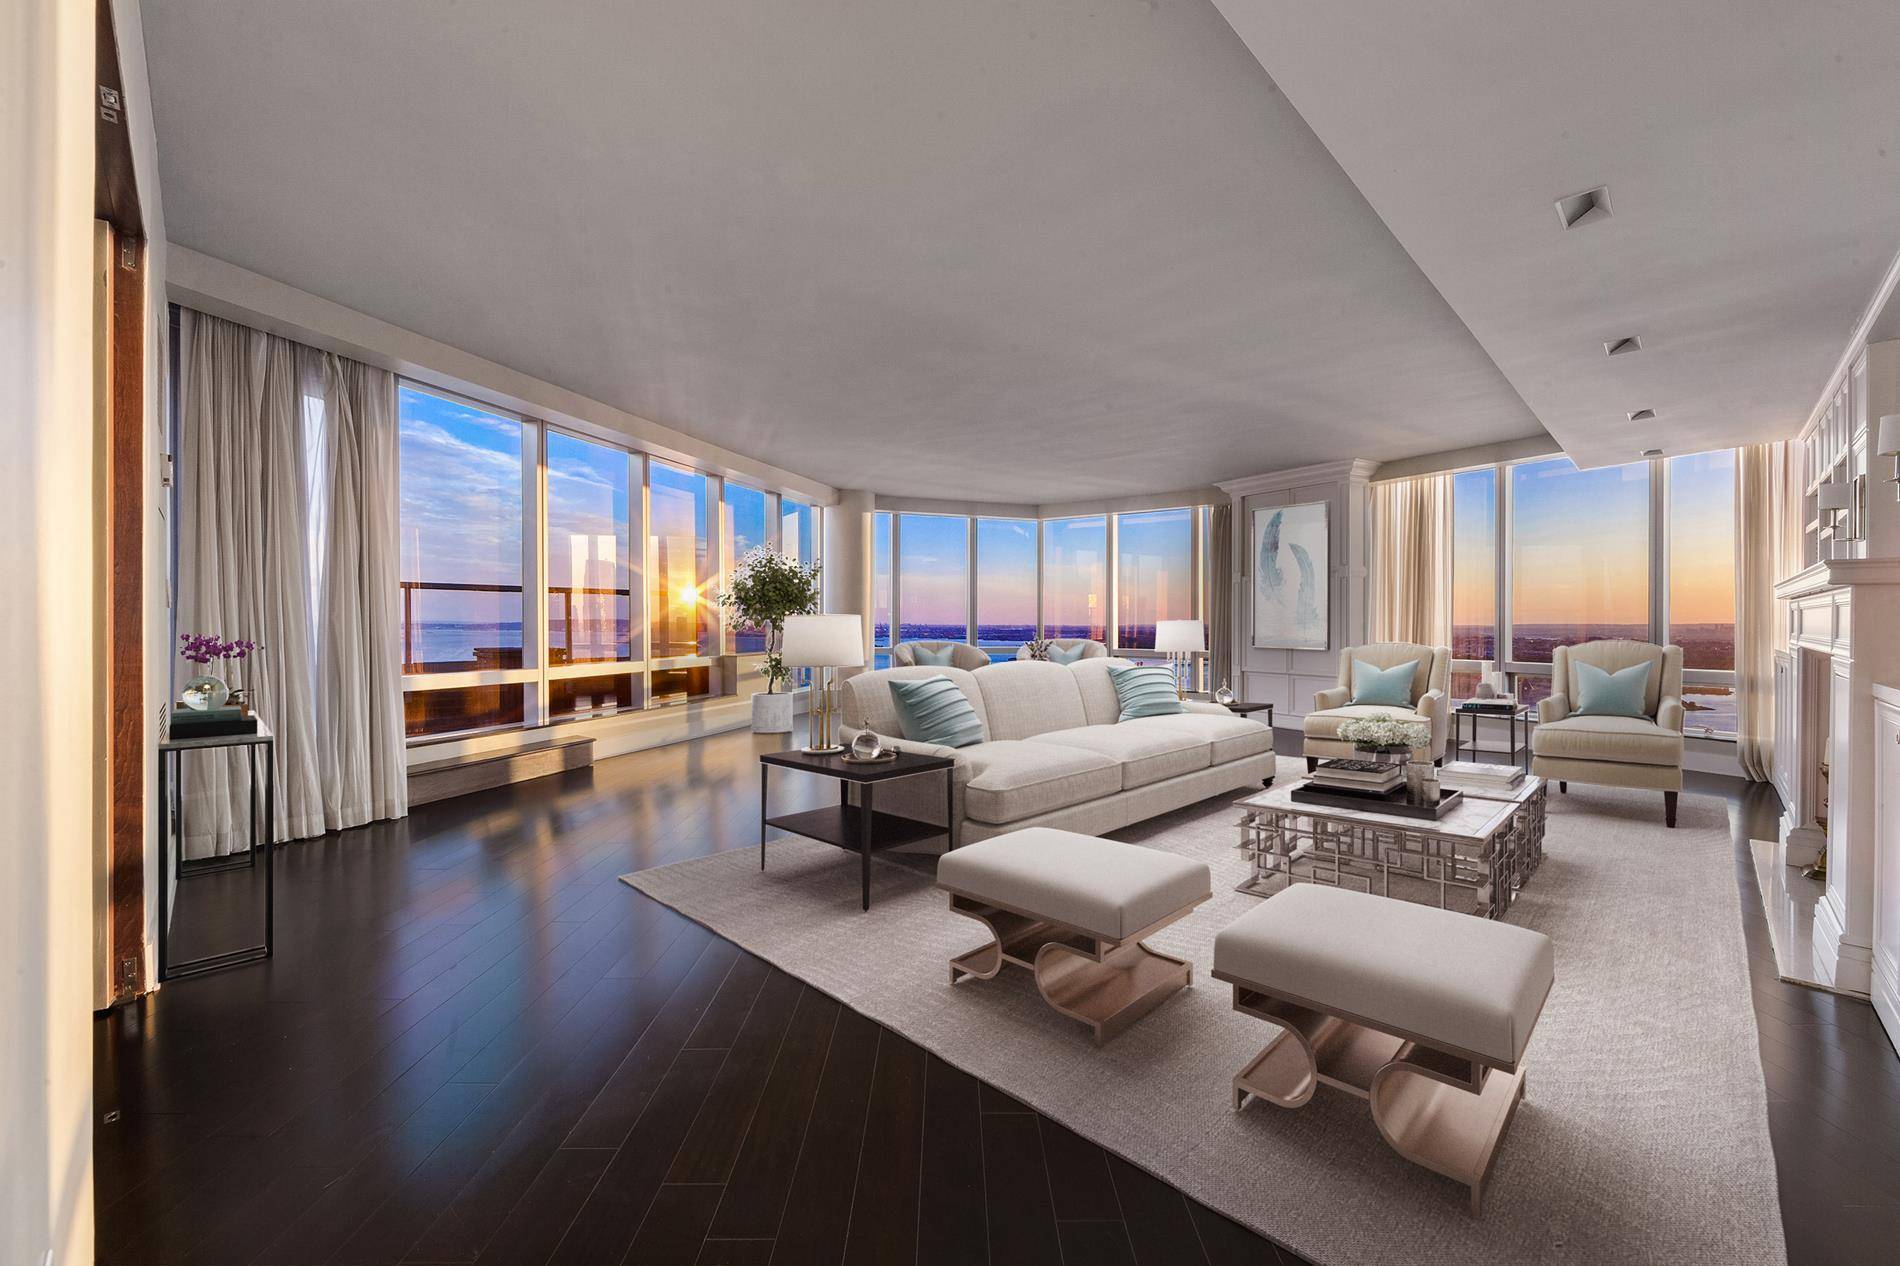 An incredible duplex penthouse atop the Residences at the Ritz Carton in Battery Park City is ready to be your dream home !